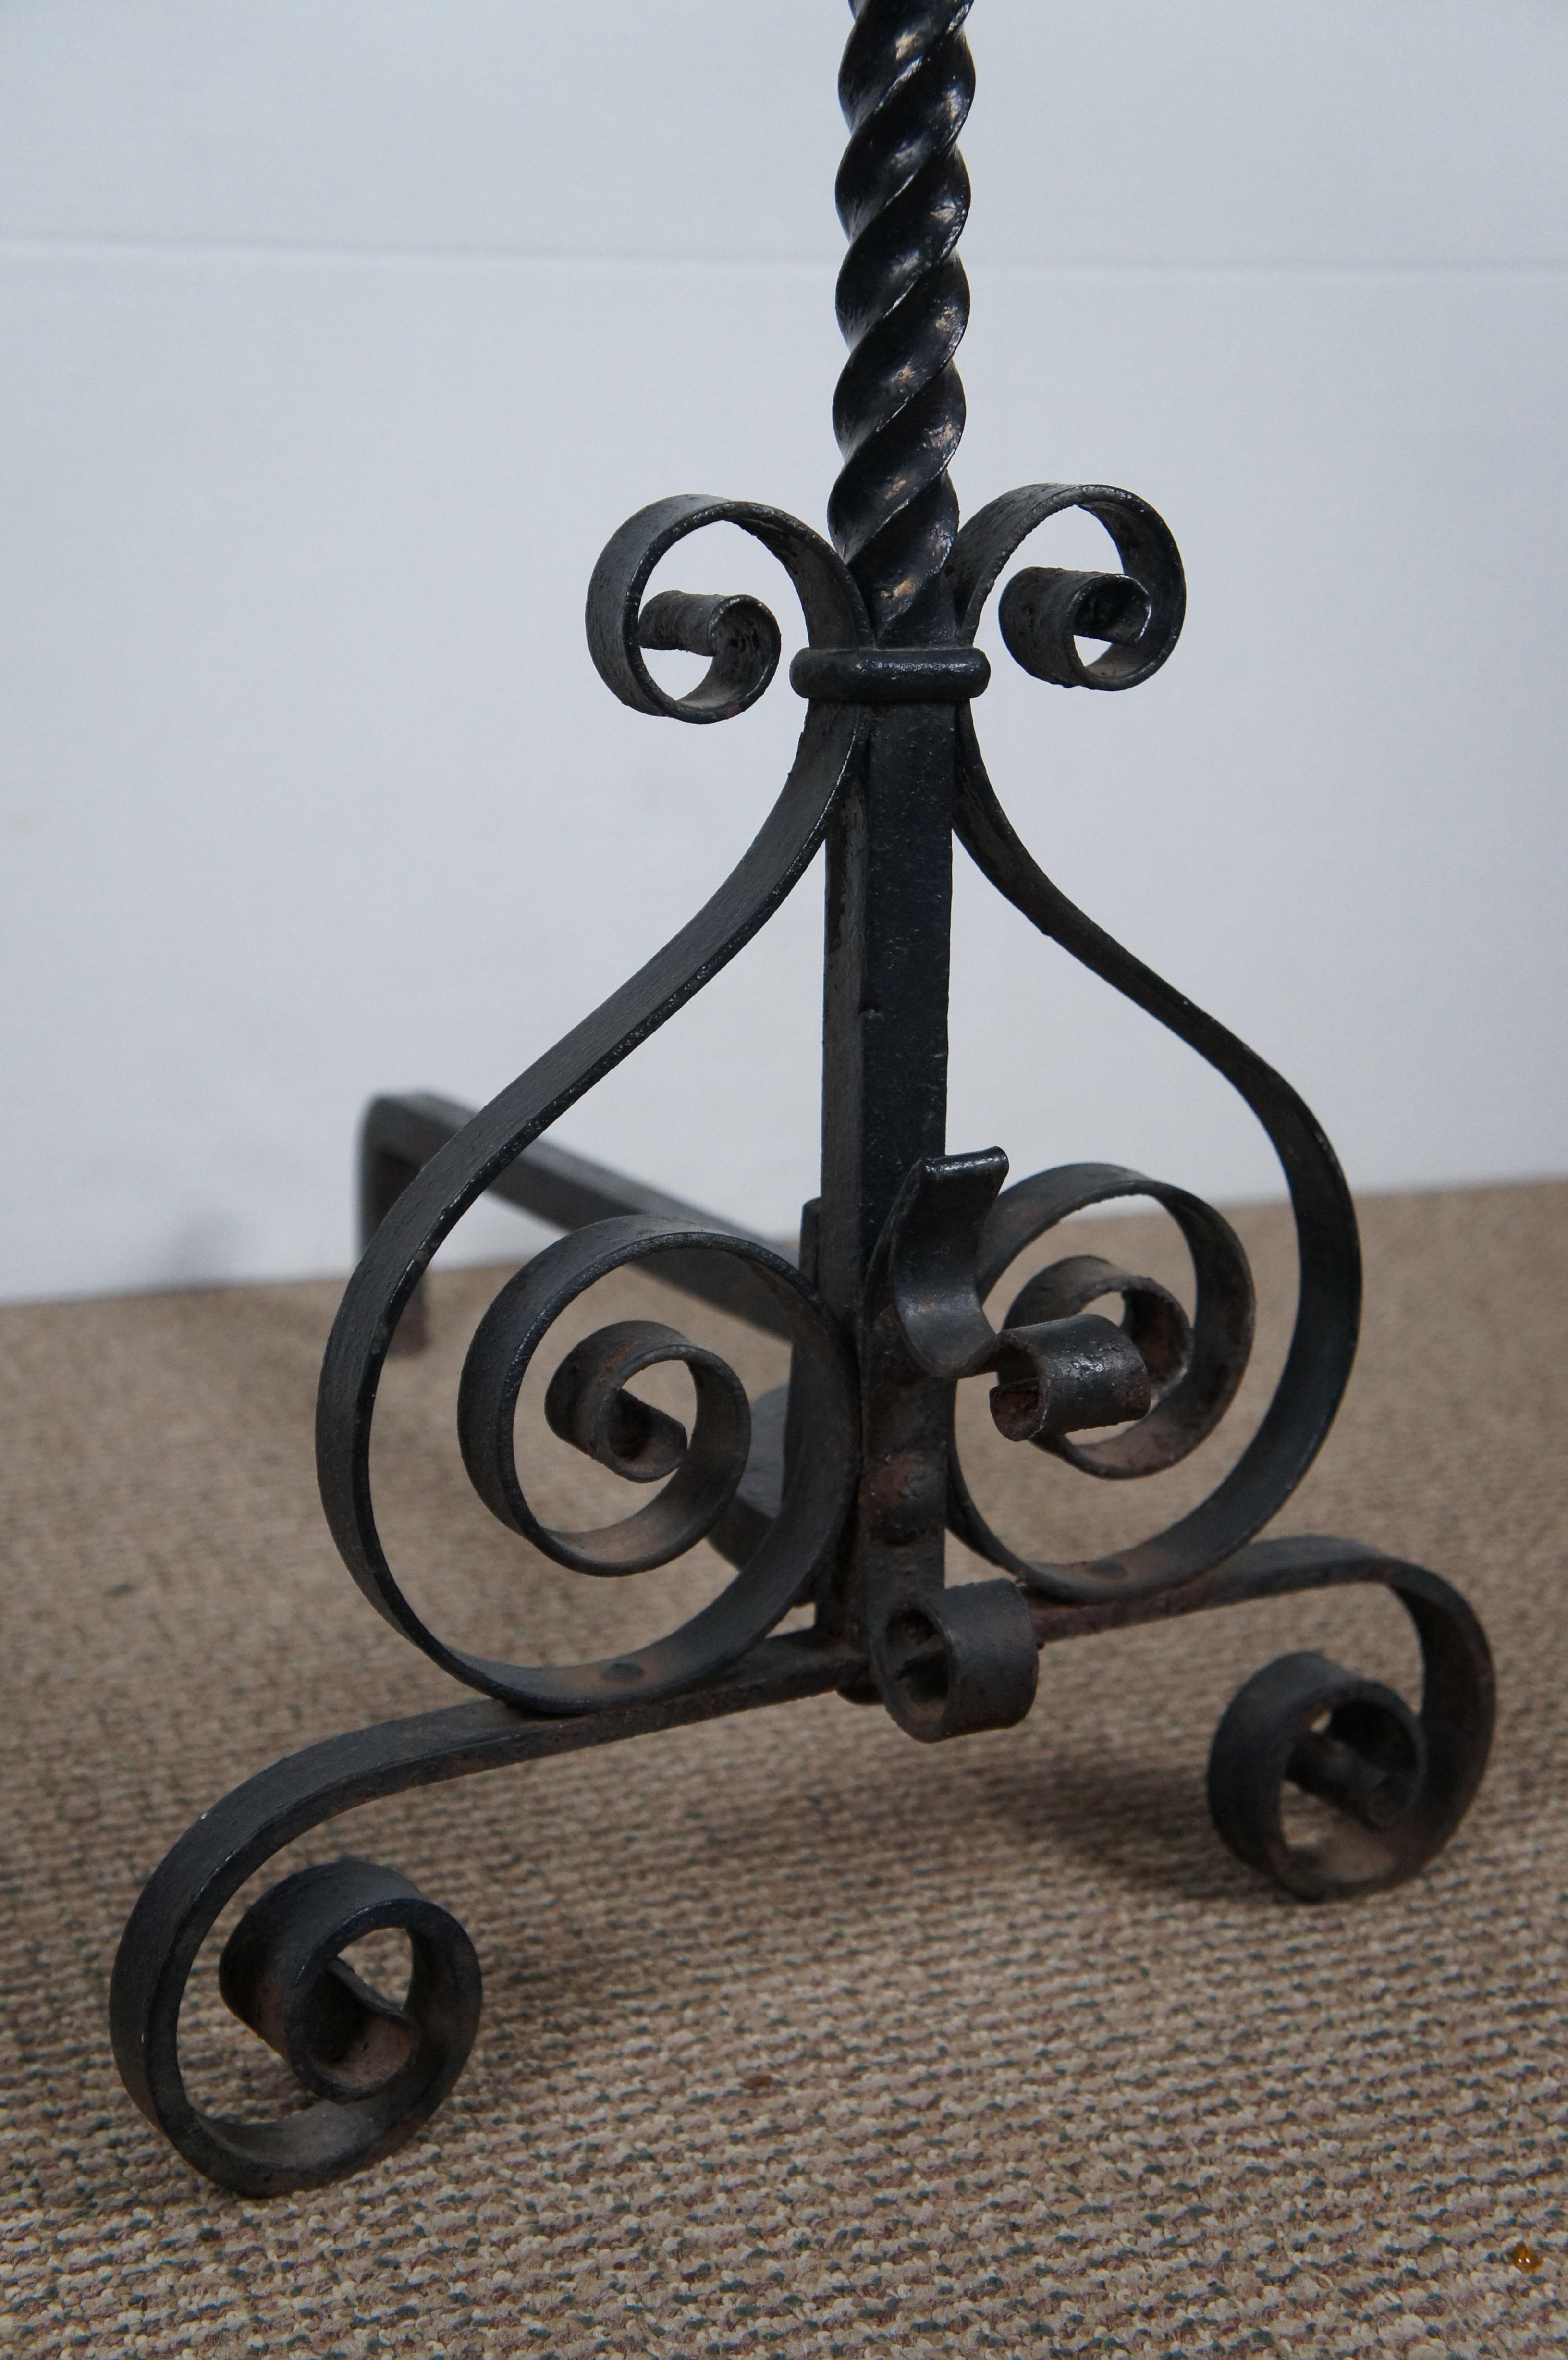 Antique Spanish Wrought Iron Scrolled Spiral Fireplace Andirons Firedogs 26